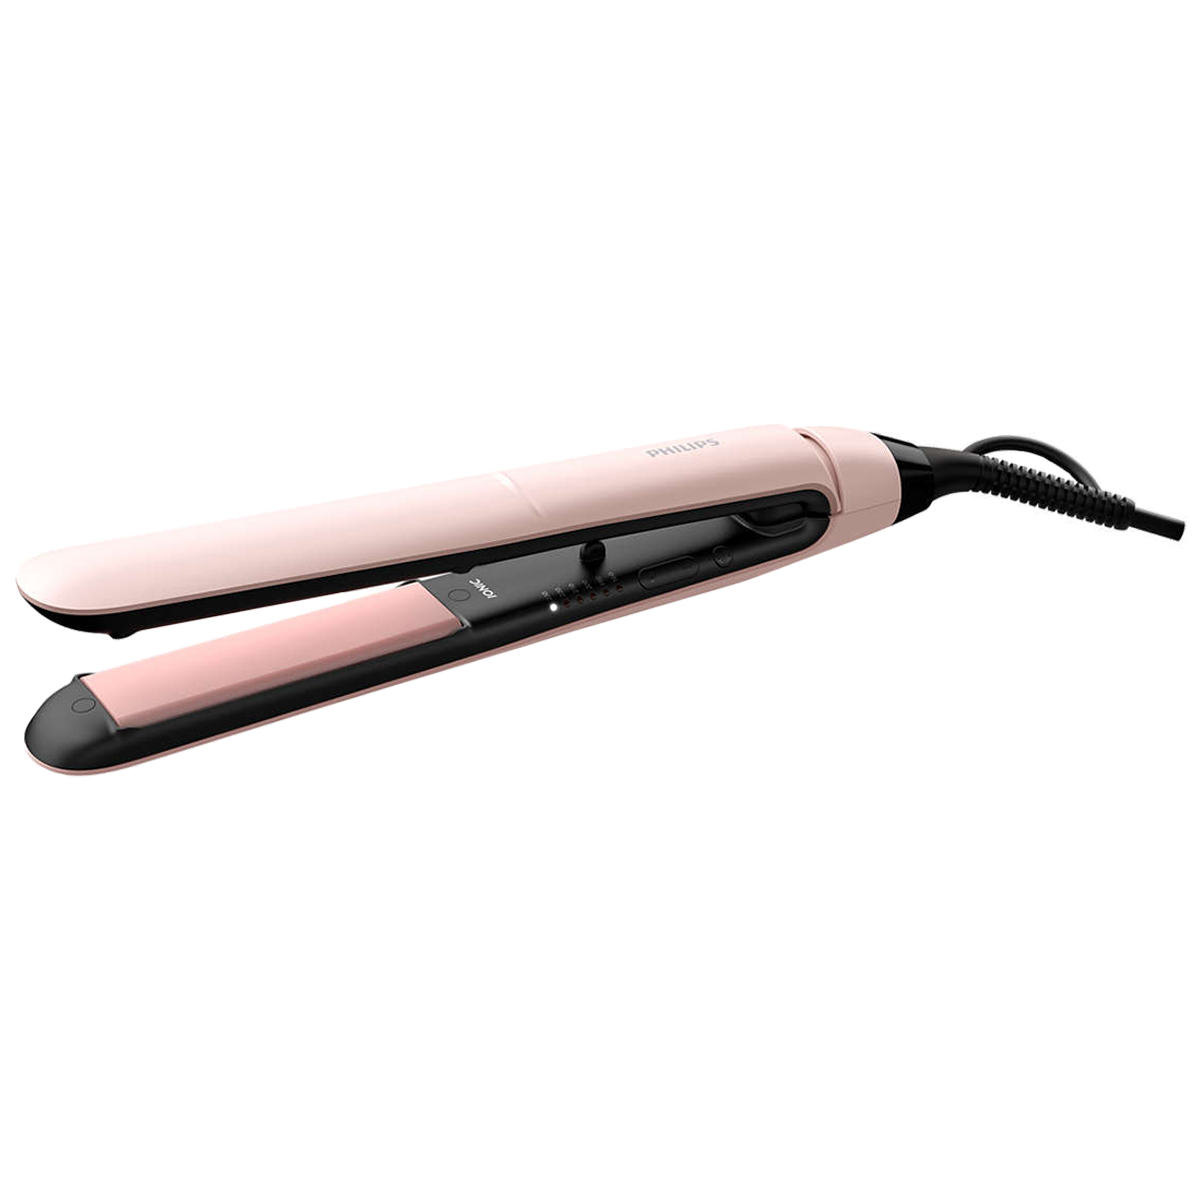 philips - philips Advanced KeraShine Corded Hair Straightener (ThermoProtect Technology, BHS378/10, Pink/Black)